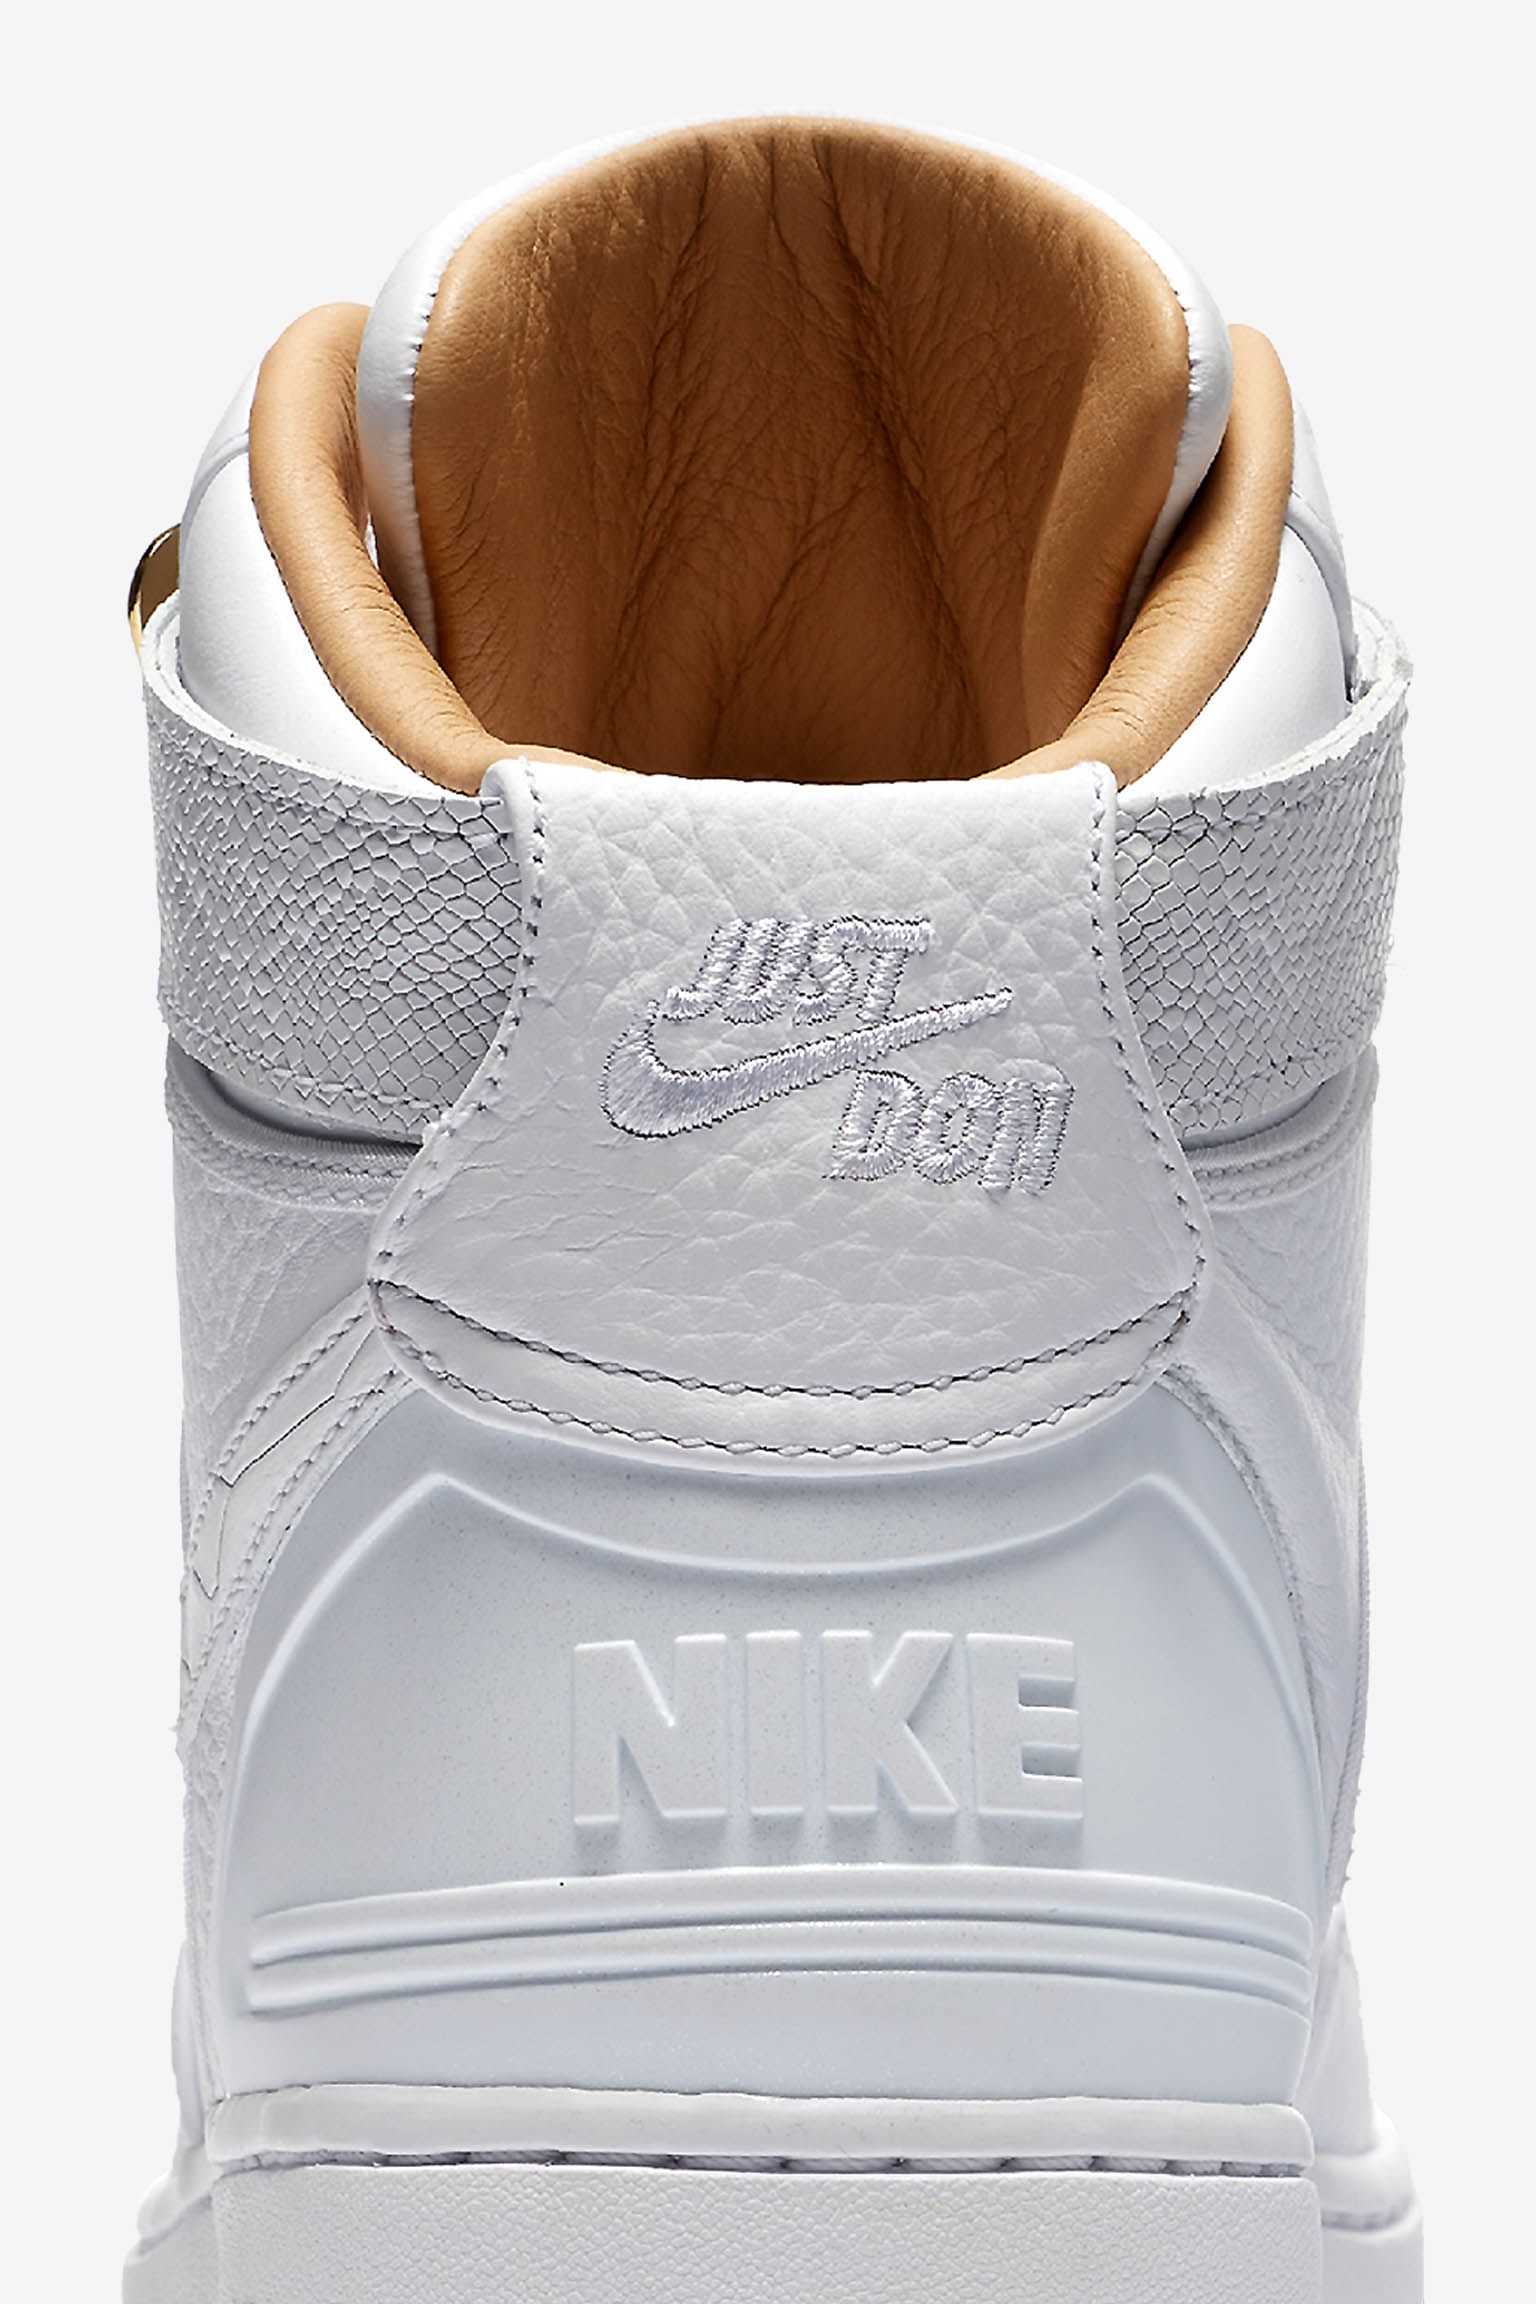 Nike Air Force 1 'Just Don' Release Date. Nike SNKRS